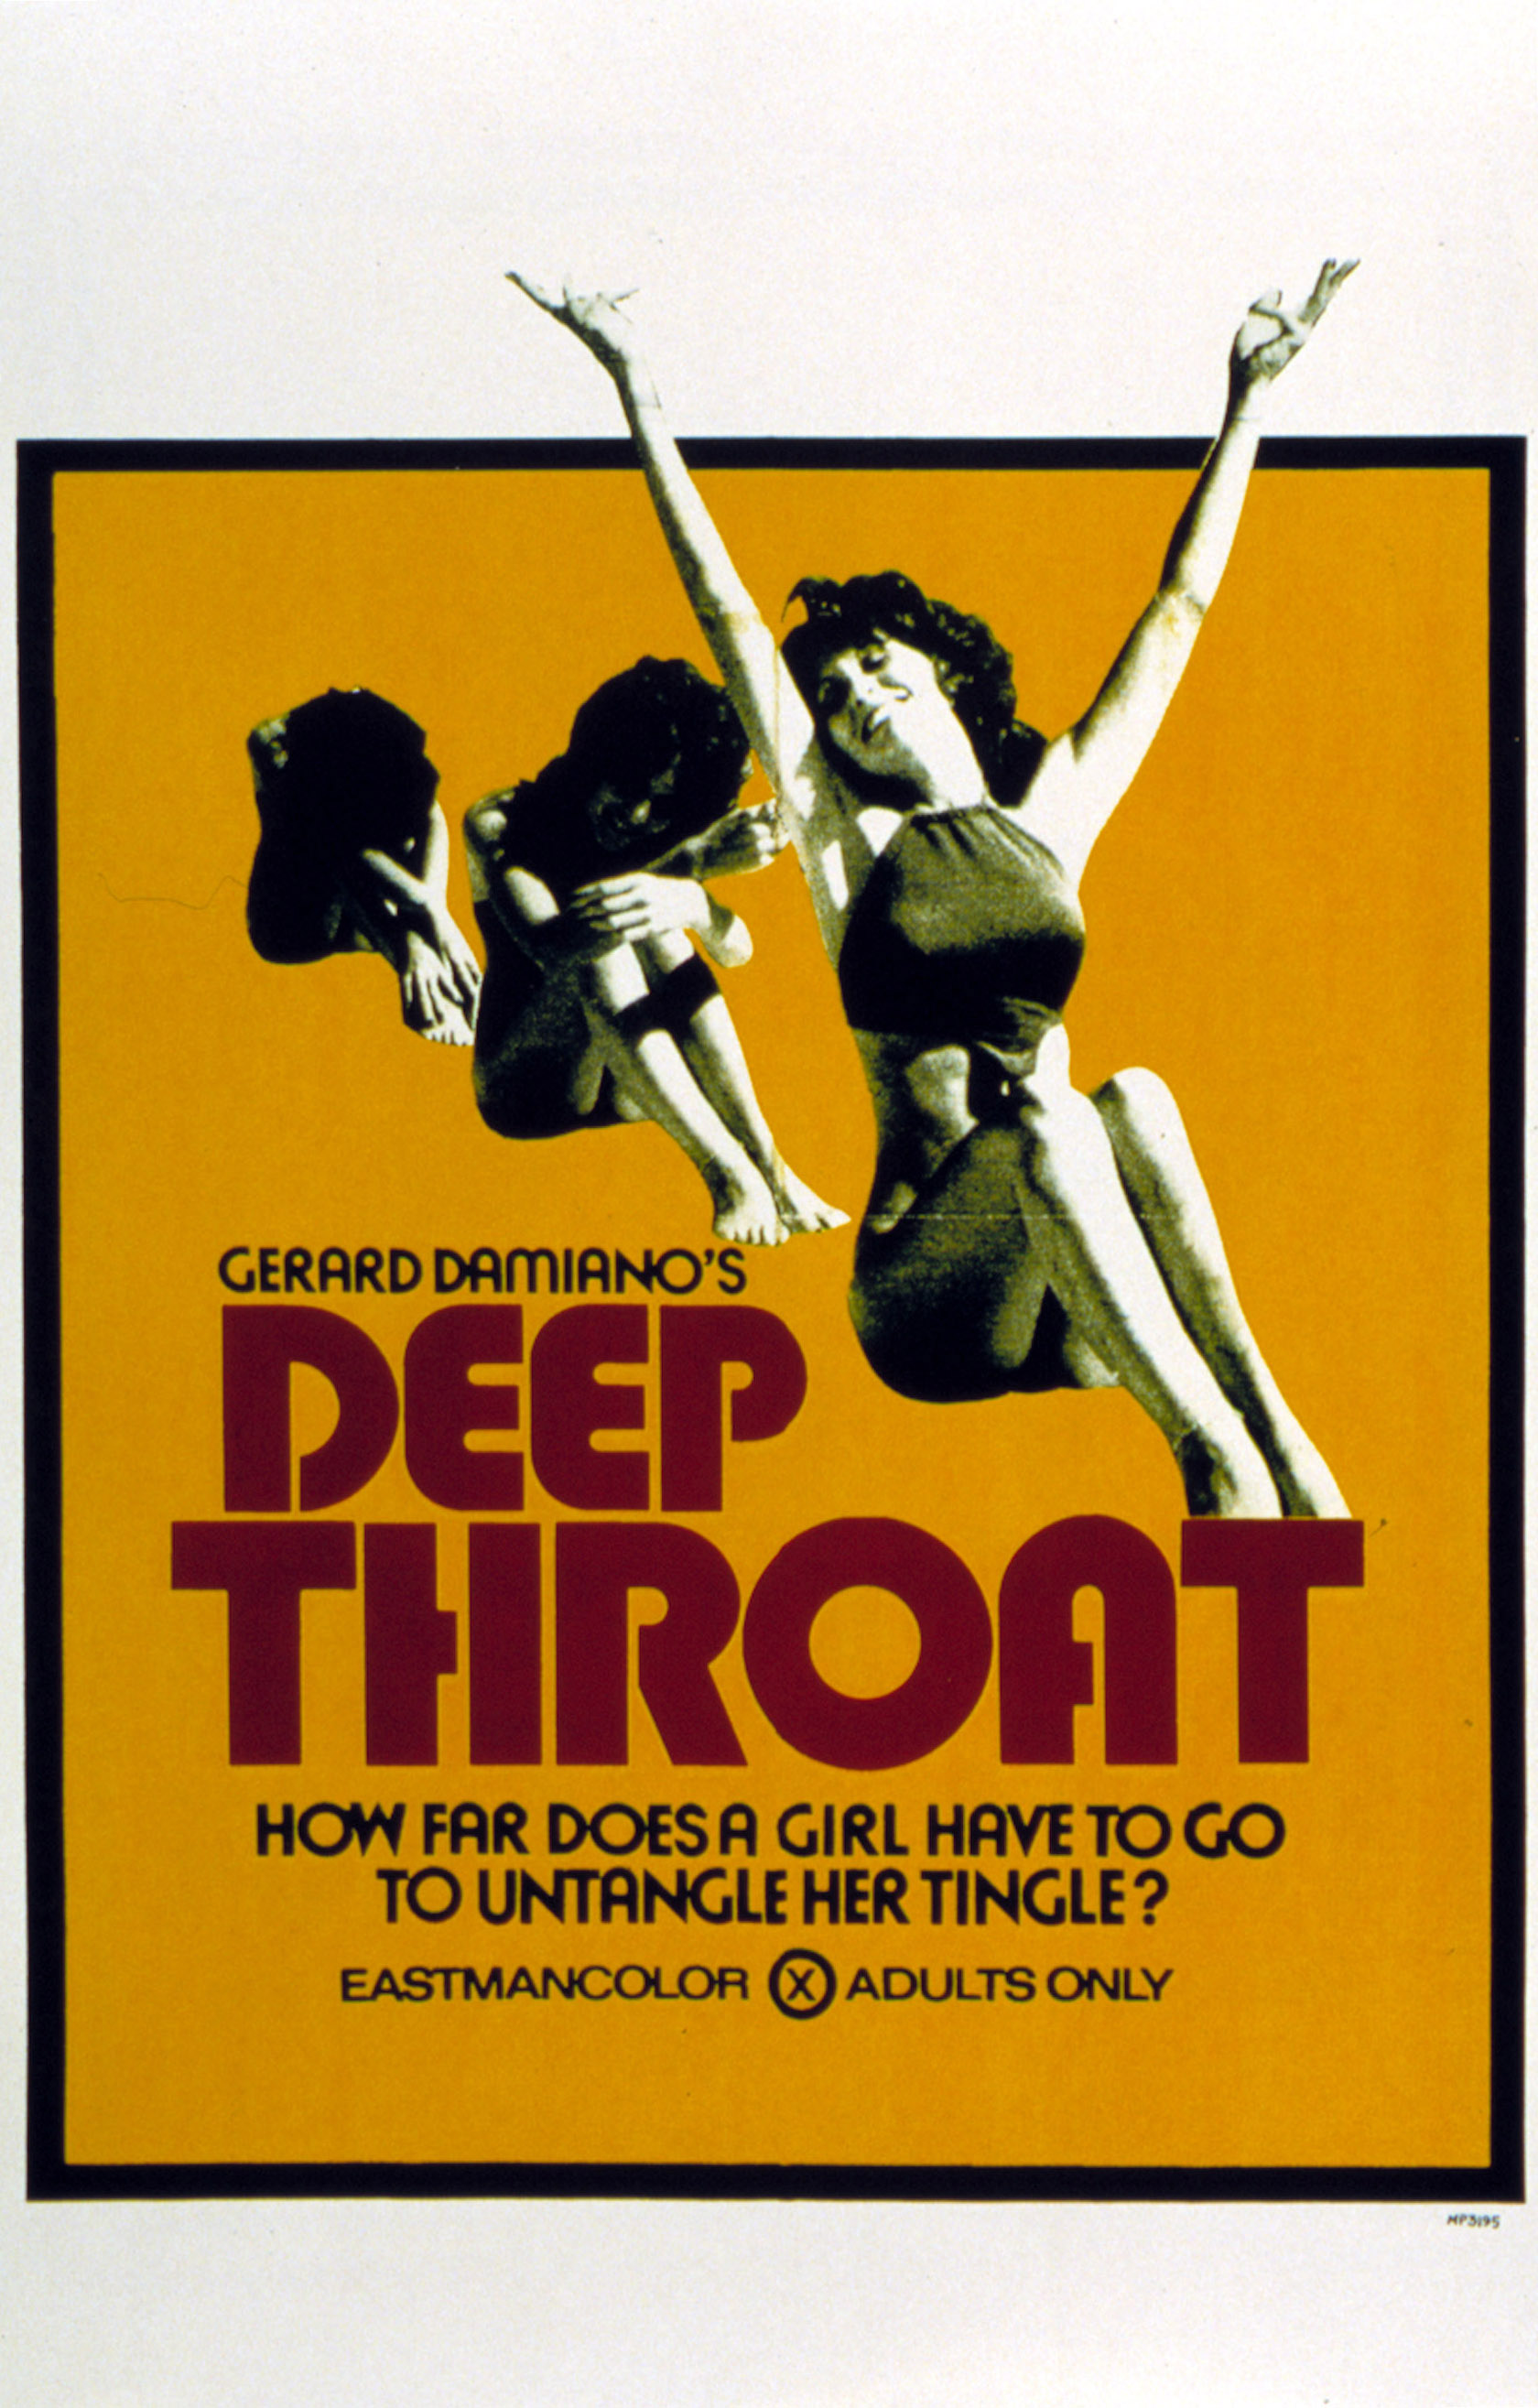 clive bullock recommends how deep is deep throat pic